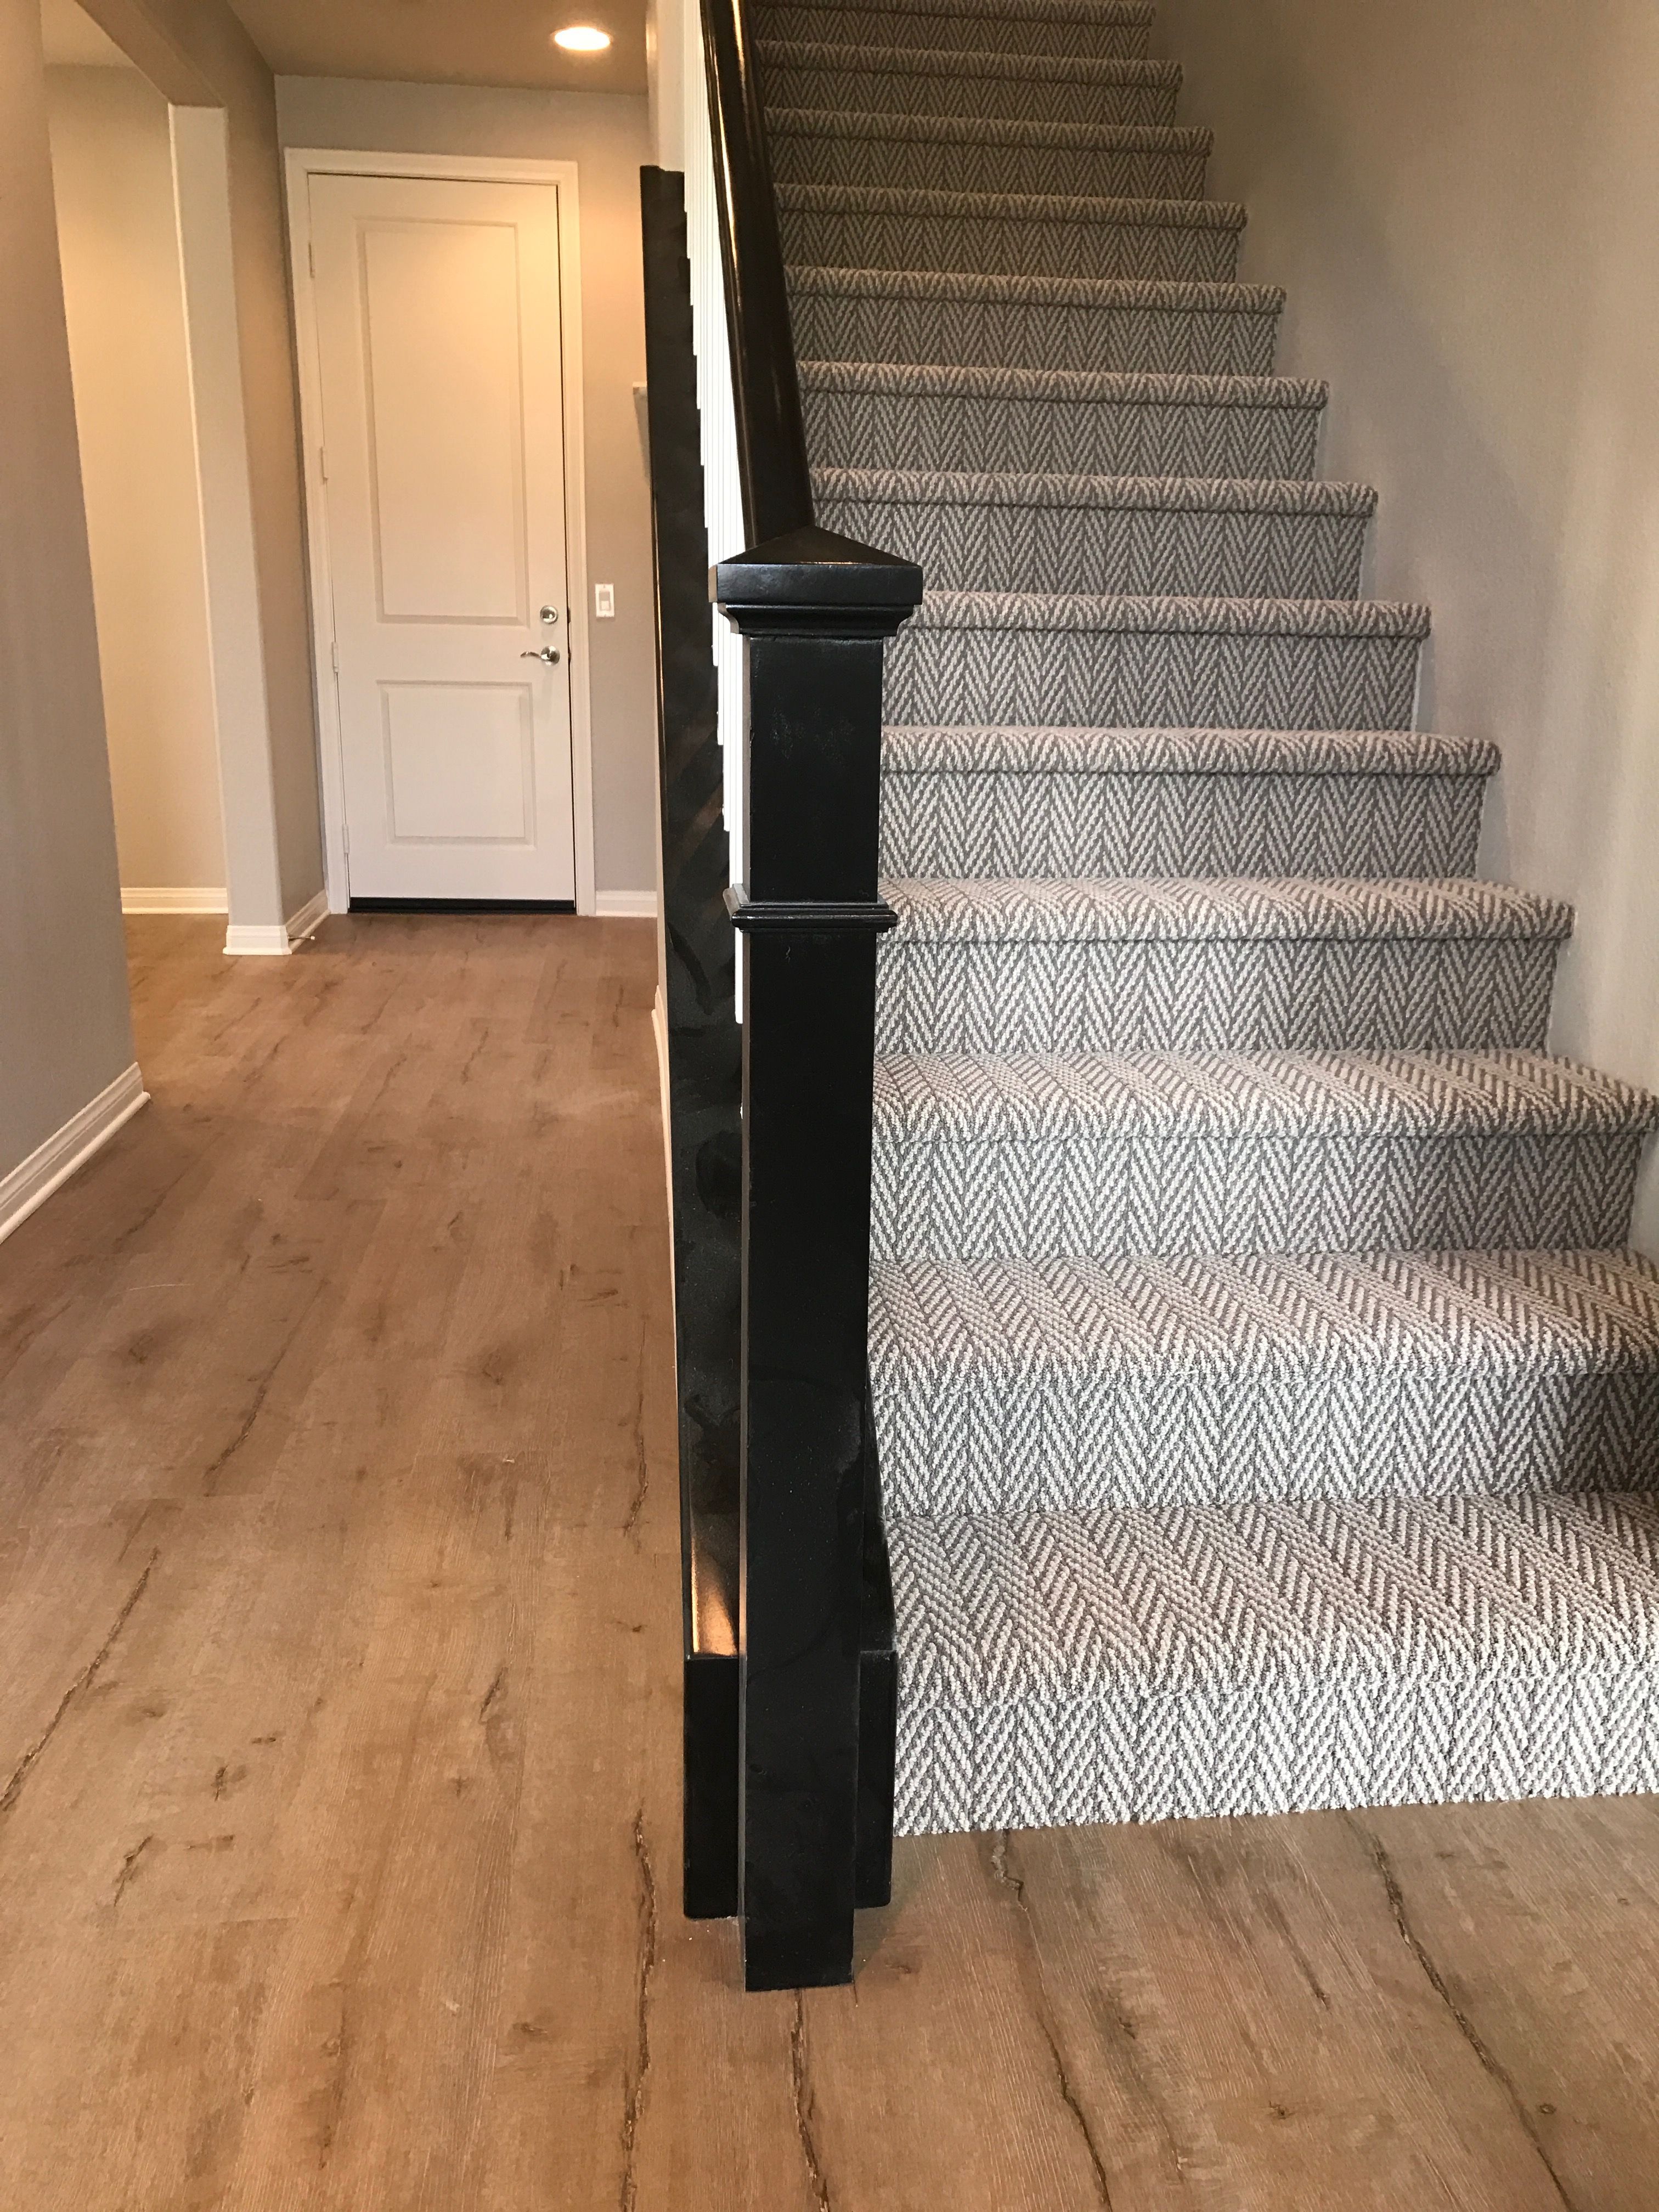 Tuftex Only Natural. I love my new carpet on these stairs. It holds up to kids and pets. High traffic stairs. Herringbone carpet on back stairs with wood floors. Dark stair rails with white. Neutral s…